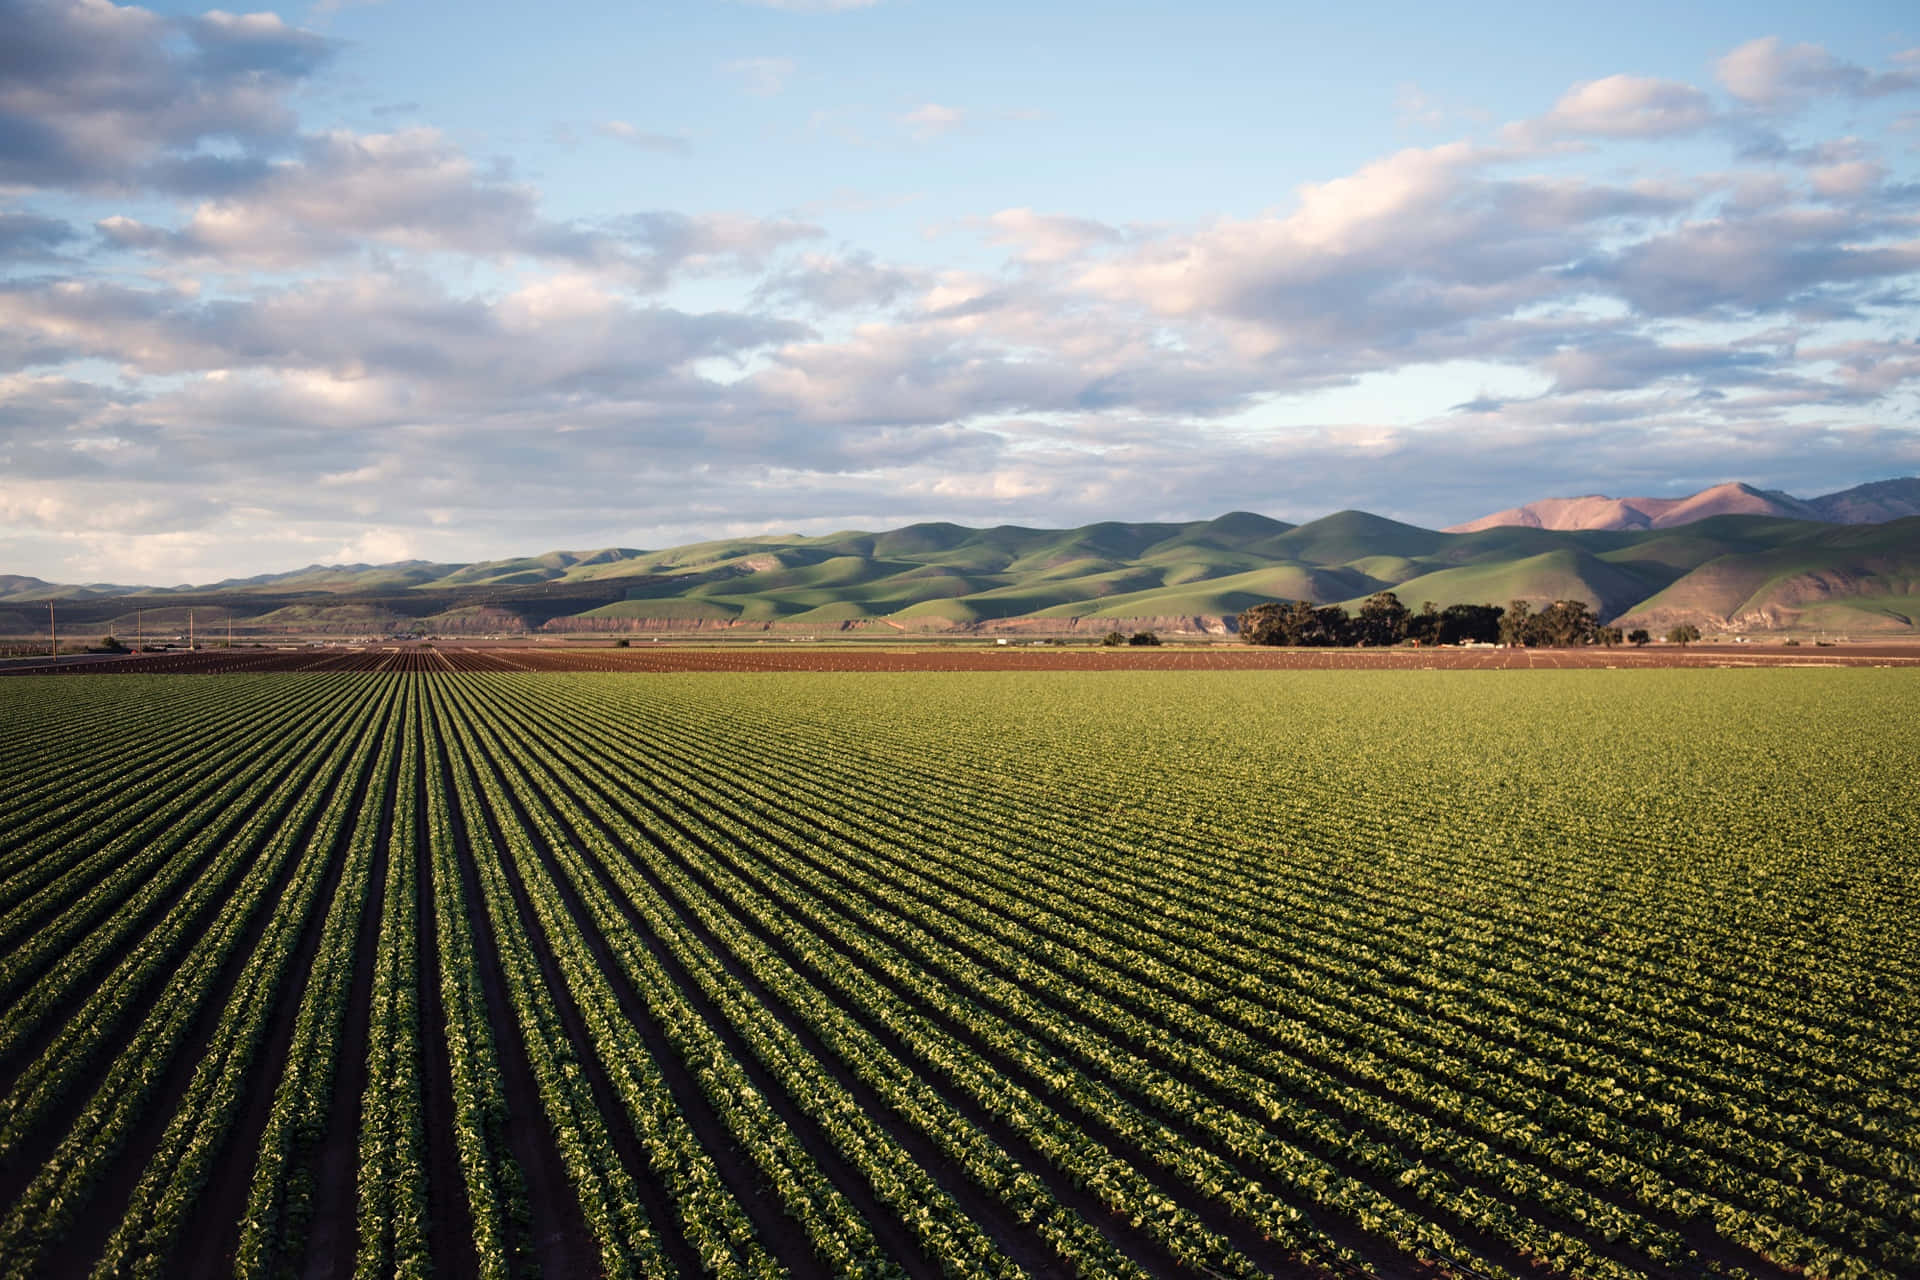 A Field Of Crops With Mountains In The Background